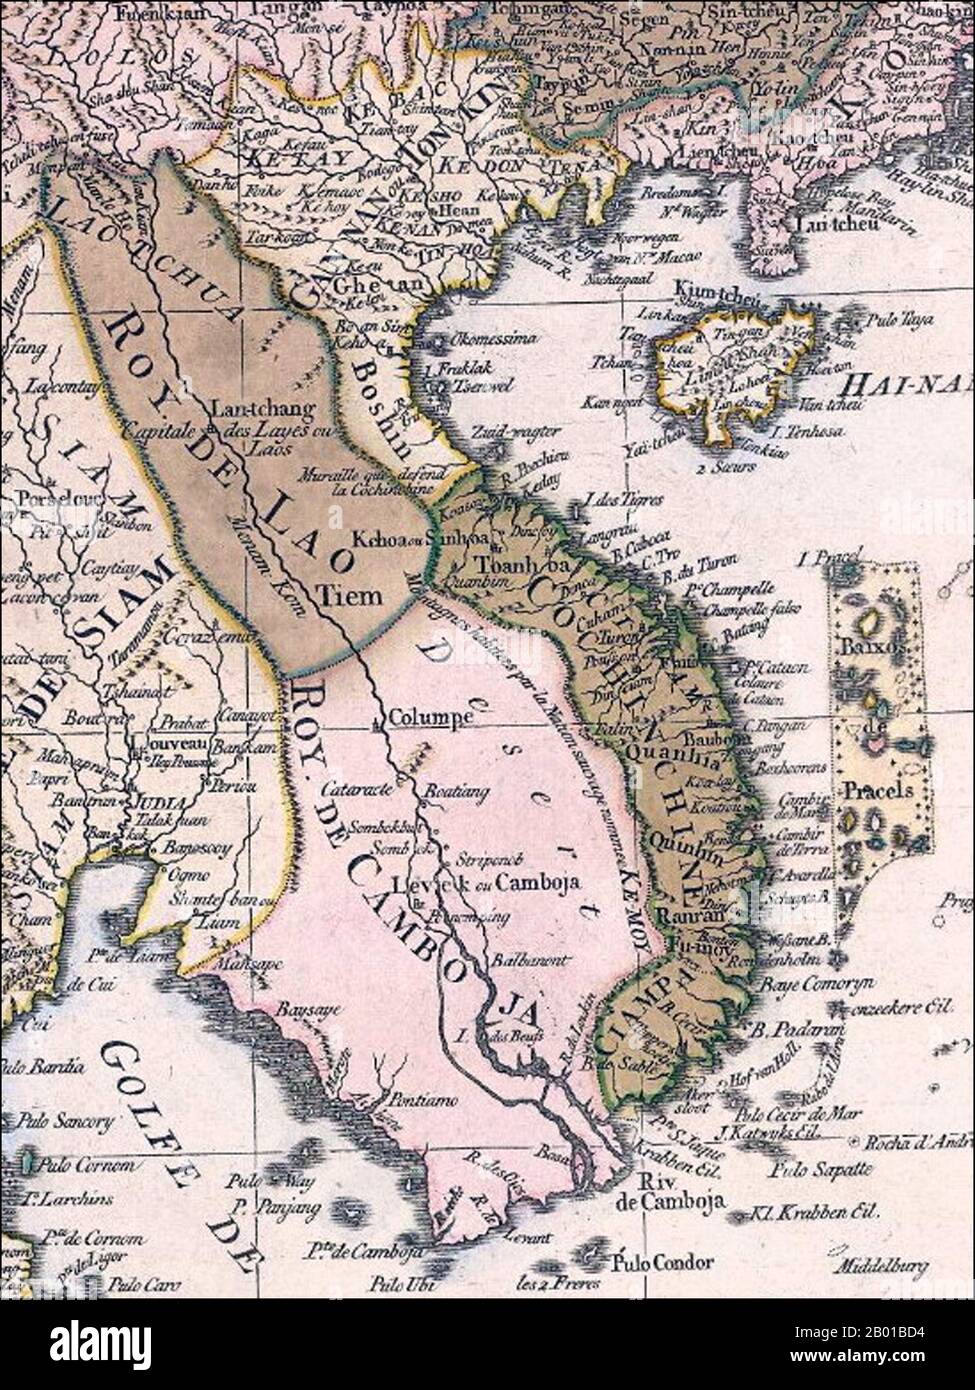 Vietnam: Franco-Dutch map of Indochina. The Paracel Islands, disputed between Vietnam and China, are depicted close to the Vietnamese coast. 1760.  18th-century map of Vietnam, derives from a map of Southeast Asia and parts of China published in Amsterdam by the firm of Covens and Mortier. The title of this map is in French, but many of the place names and notes have been translated into Dutch. Stock Photo